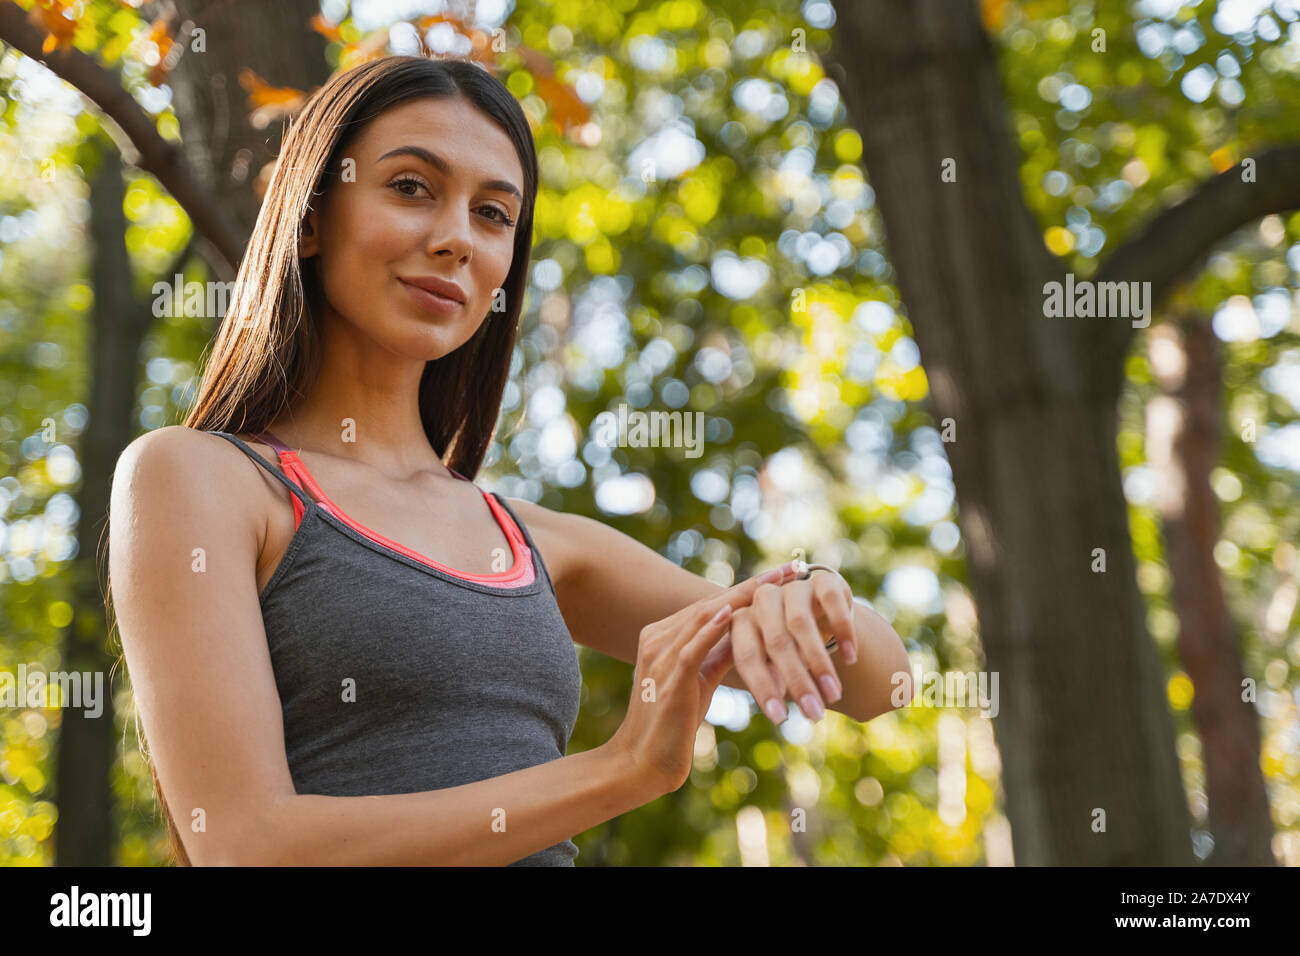 Happy woman being satisfied with her training Stock Photo